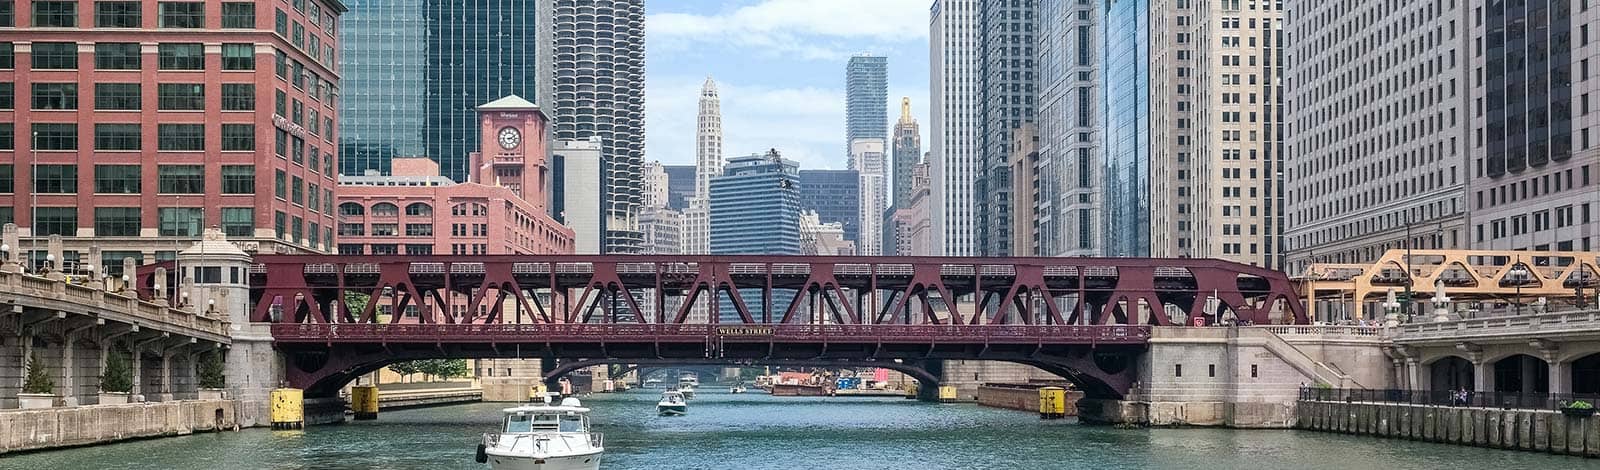 A view of the Chicago skyline behind Wells Street bridge, taken from the Chicago River.